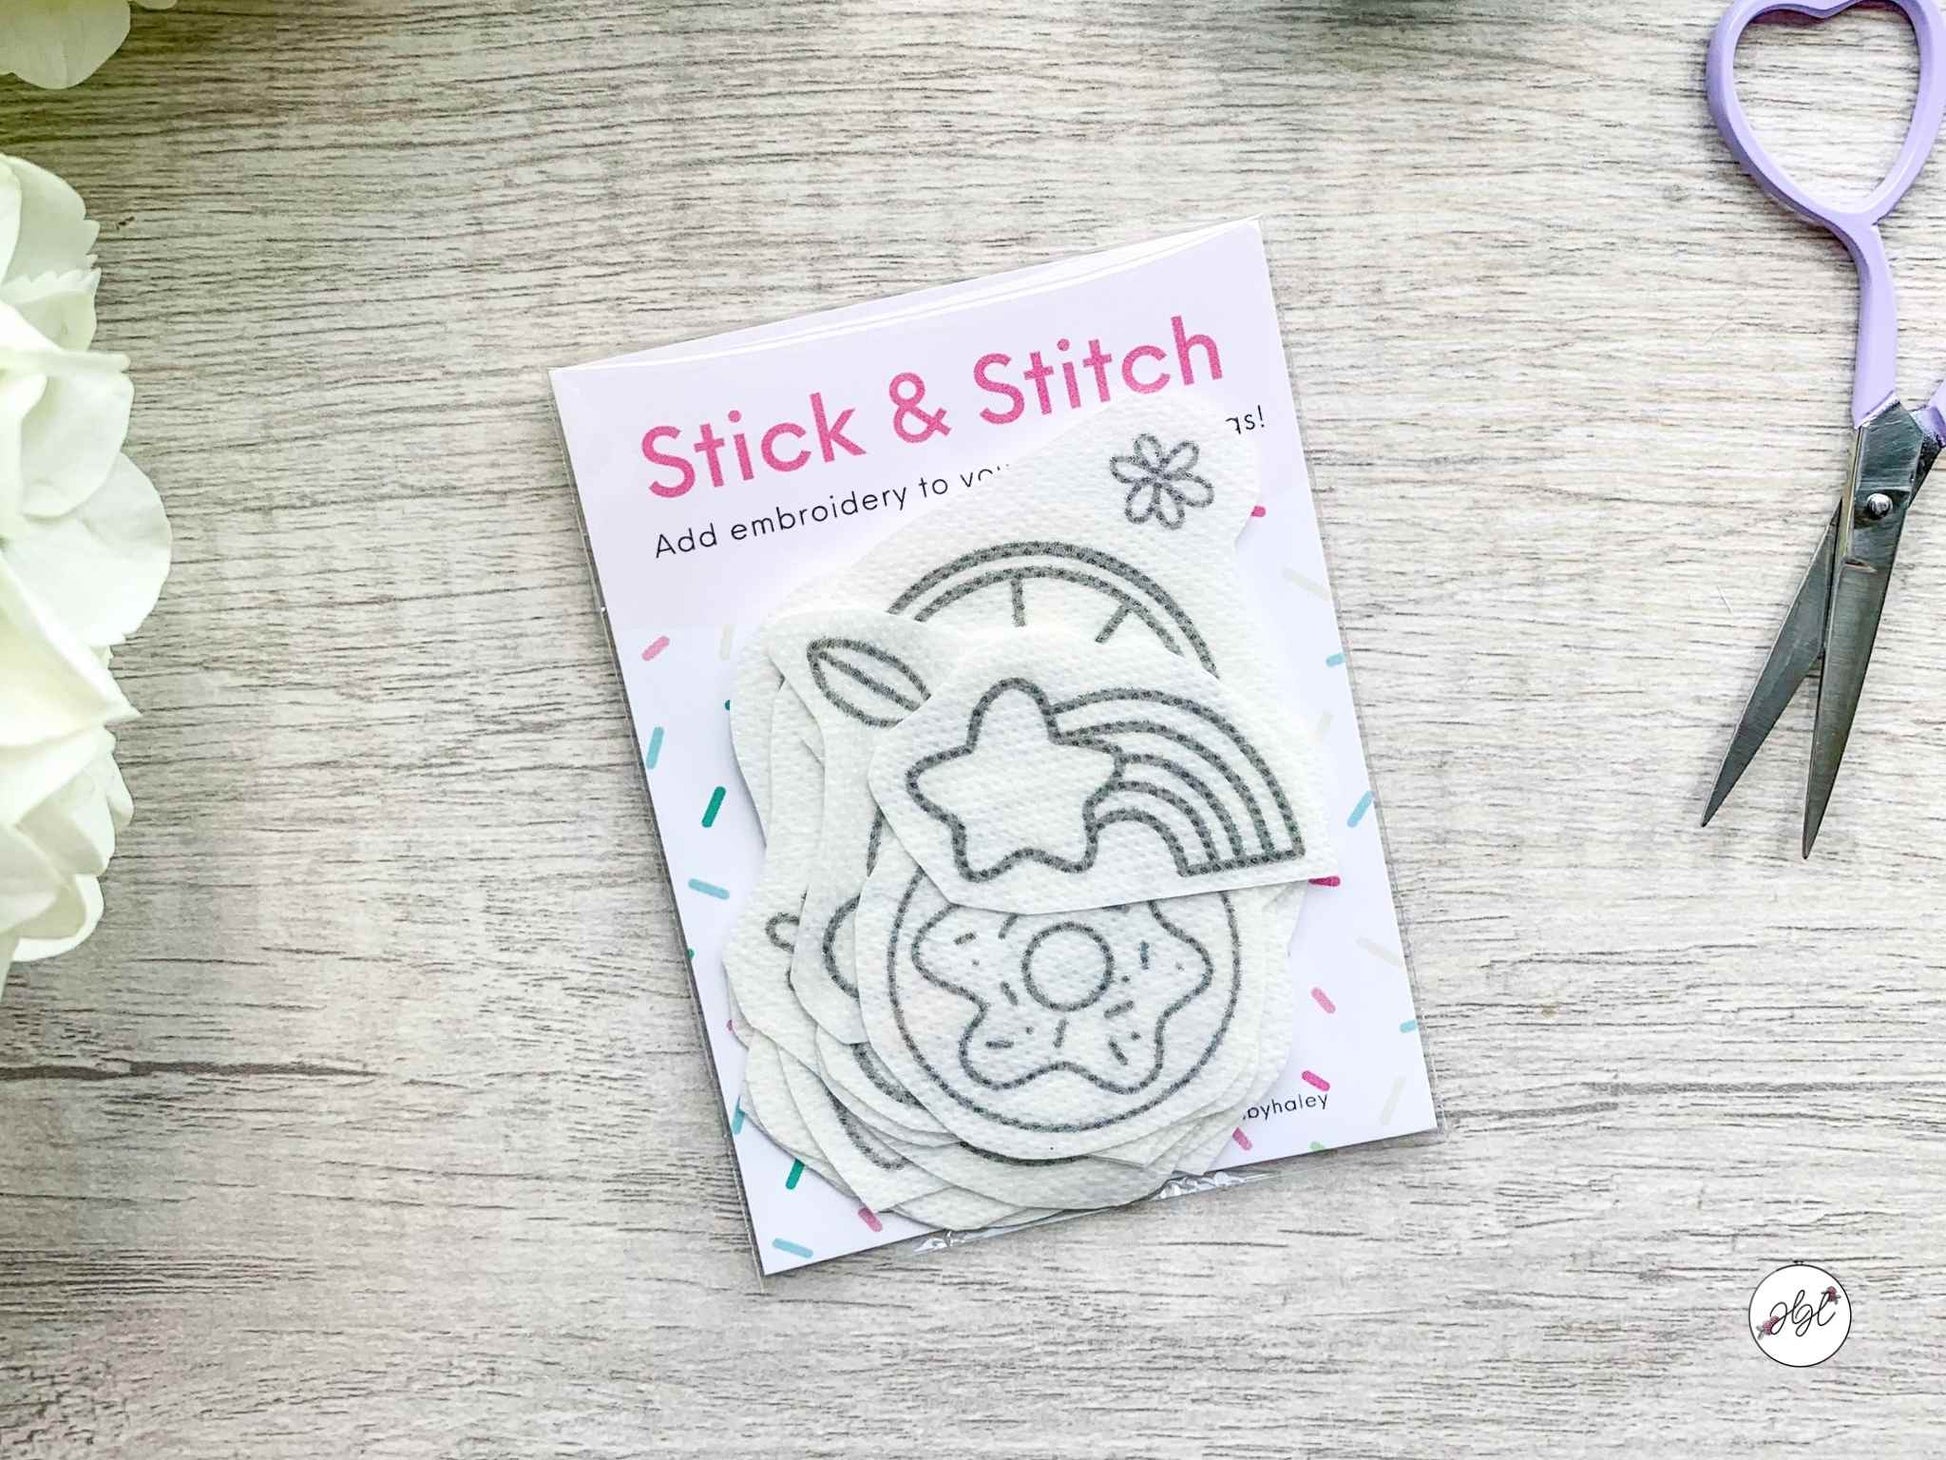 Stick and Stitch Embroidery Patterns, Water Soluble Patterns for